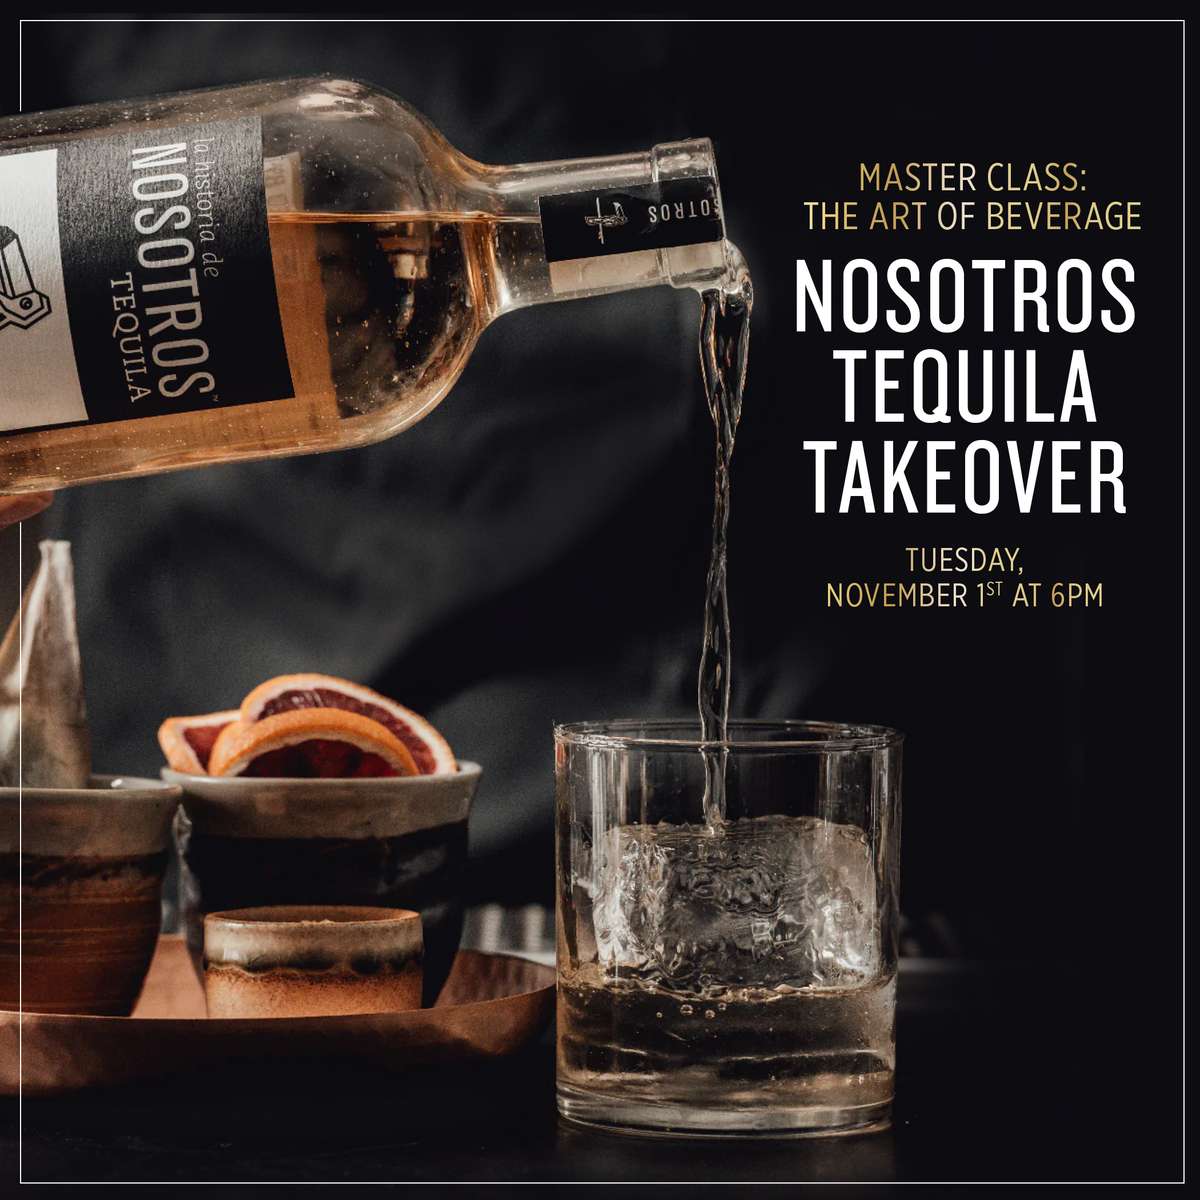 Masterclass the art of beverage Nosotros Tequila Takeover Tuesday Nov 1 at 6pm